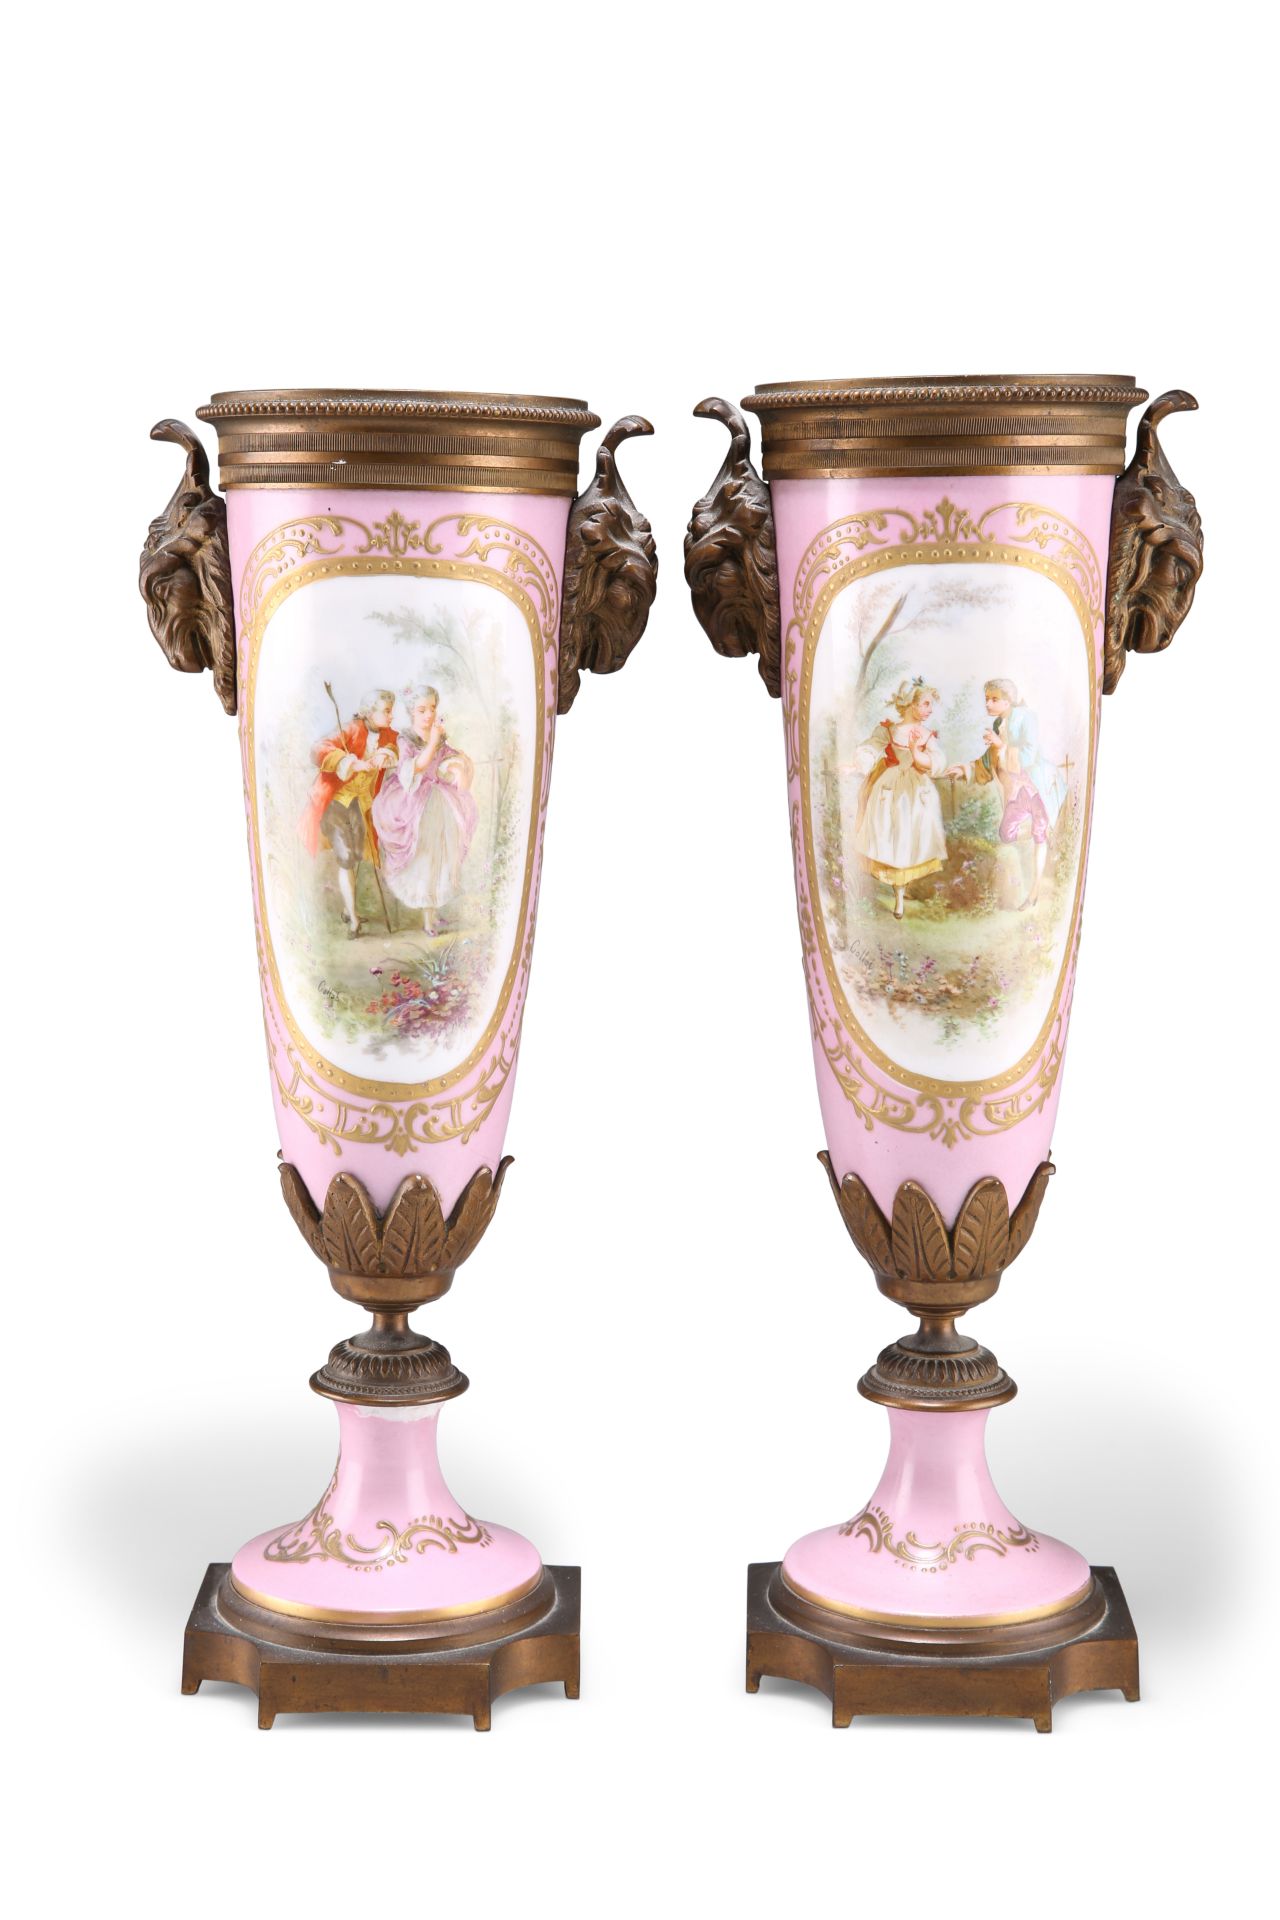 A PAIR OF 19TH CENTURY SÈVRES-STYLE GILT-METAL MOUNTED VASES